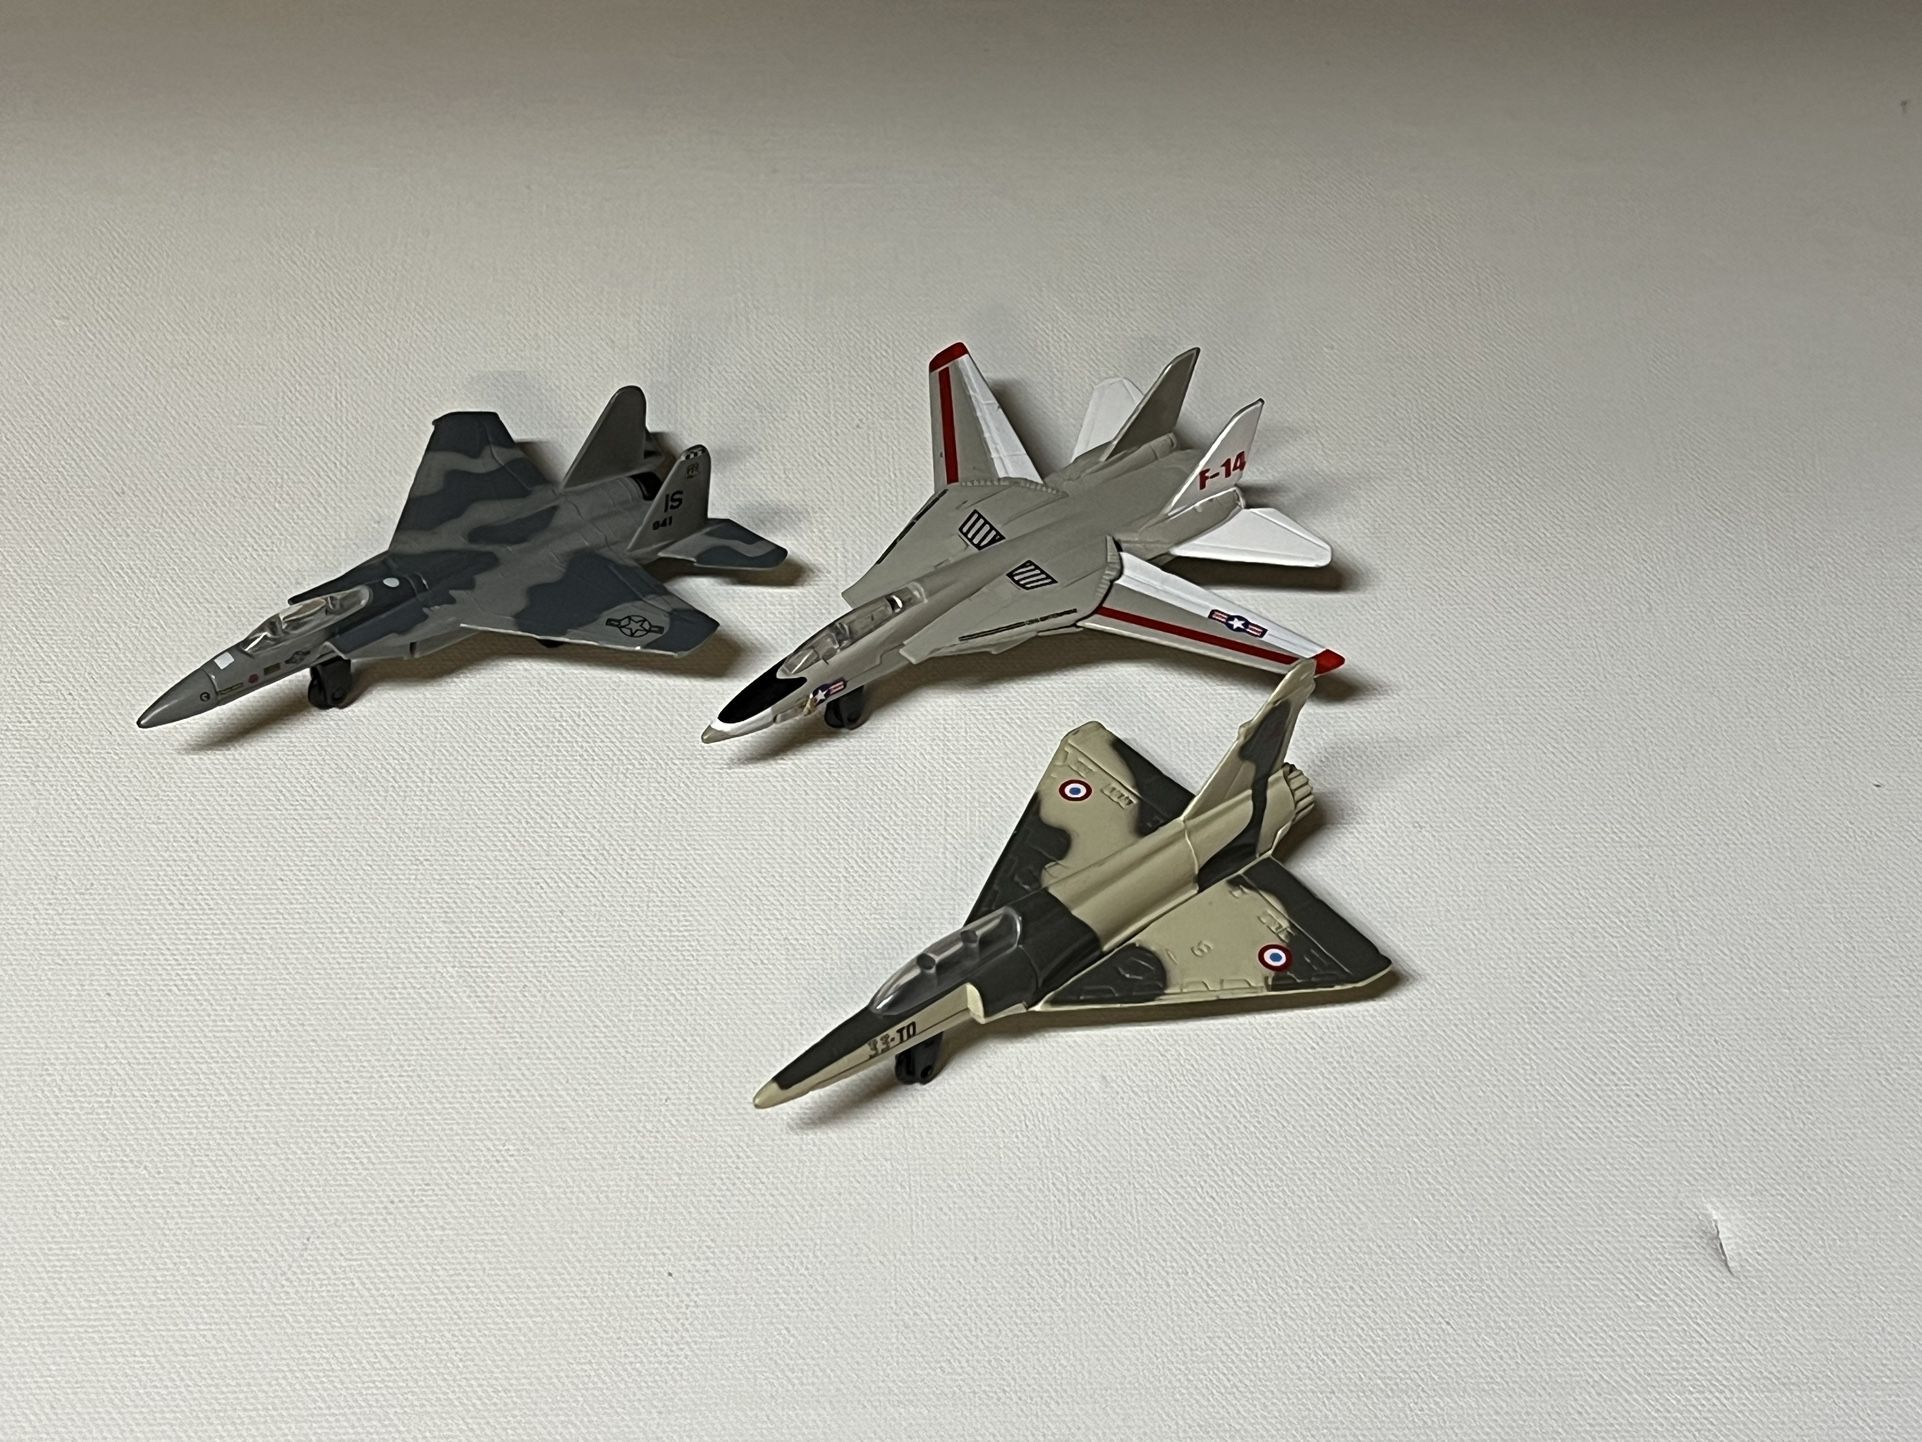 Airplanes Lot Die Cast F-14 Tomcat Aircraft A143 Variable-Sweep Wing Fighter 4.3” Long